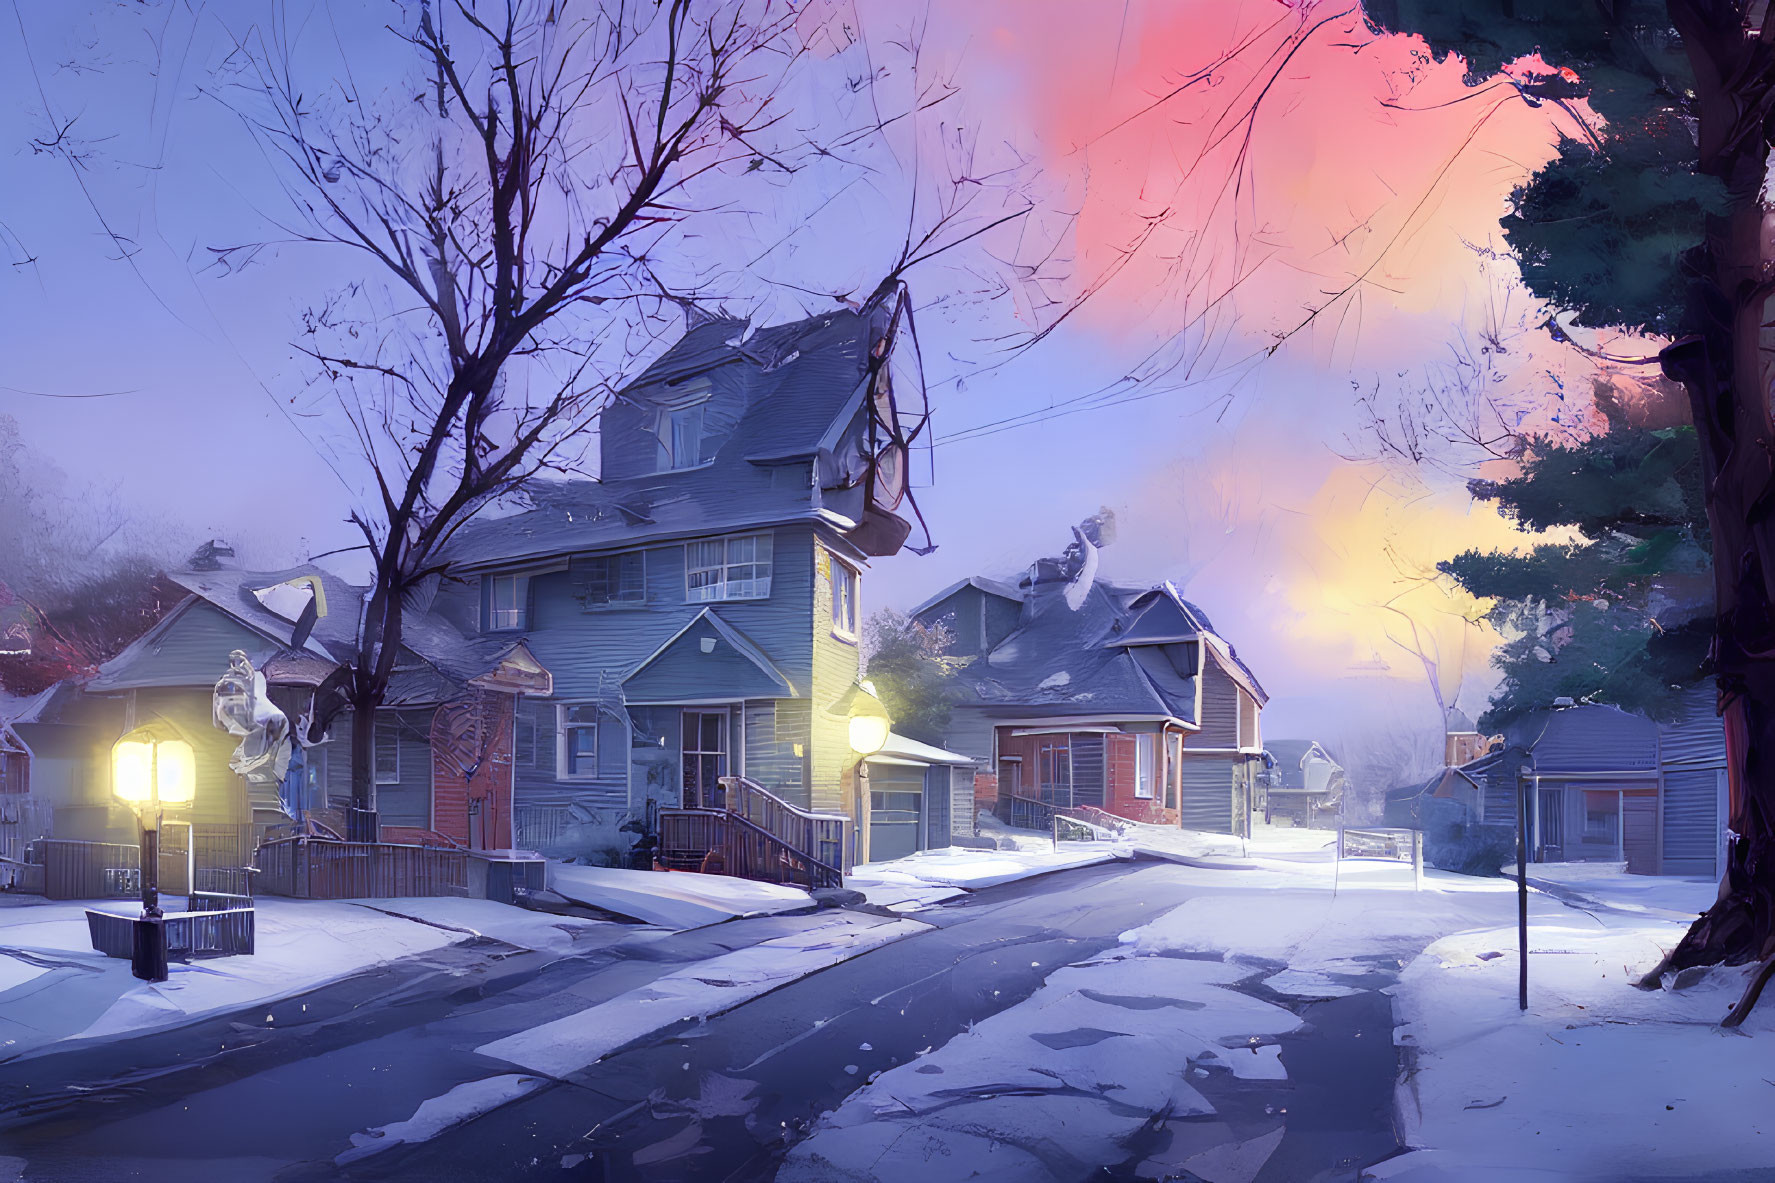 Snowy residential street at twilight with distinctive houses, bare trees, and vibrant sky.